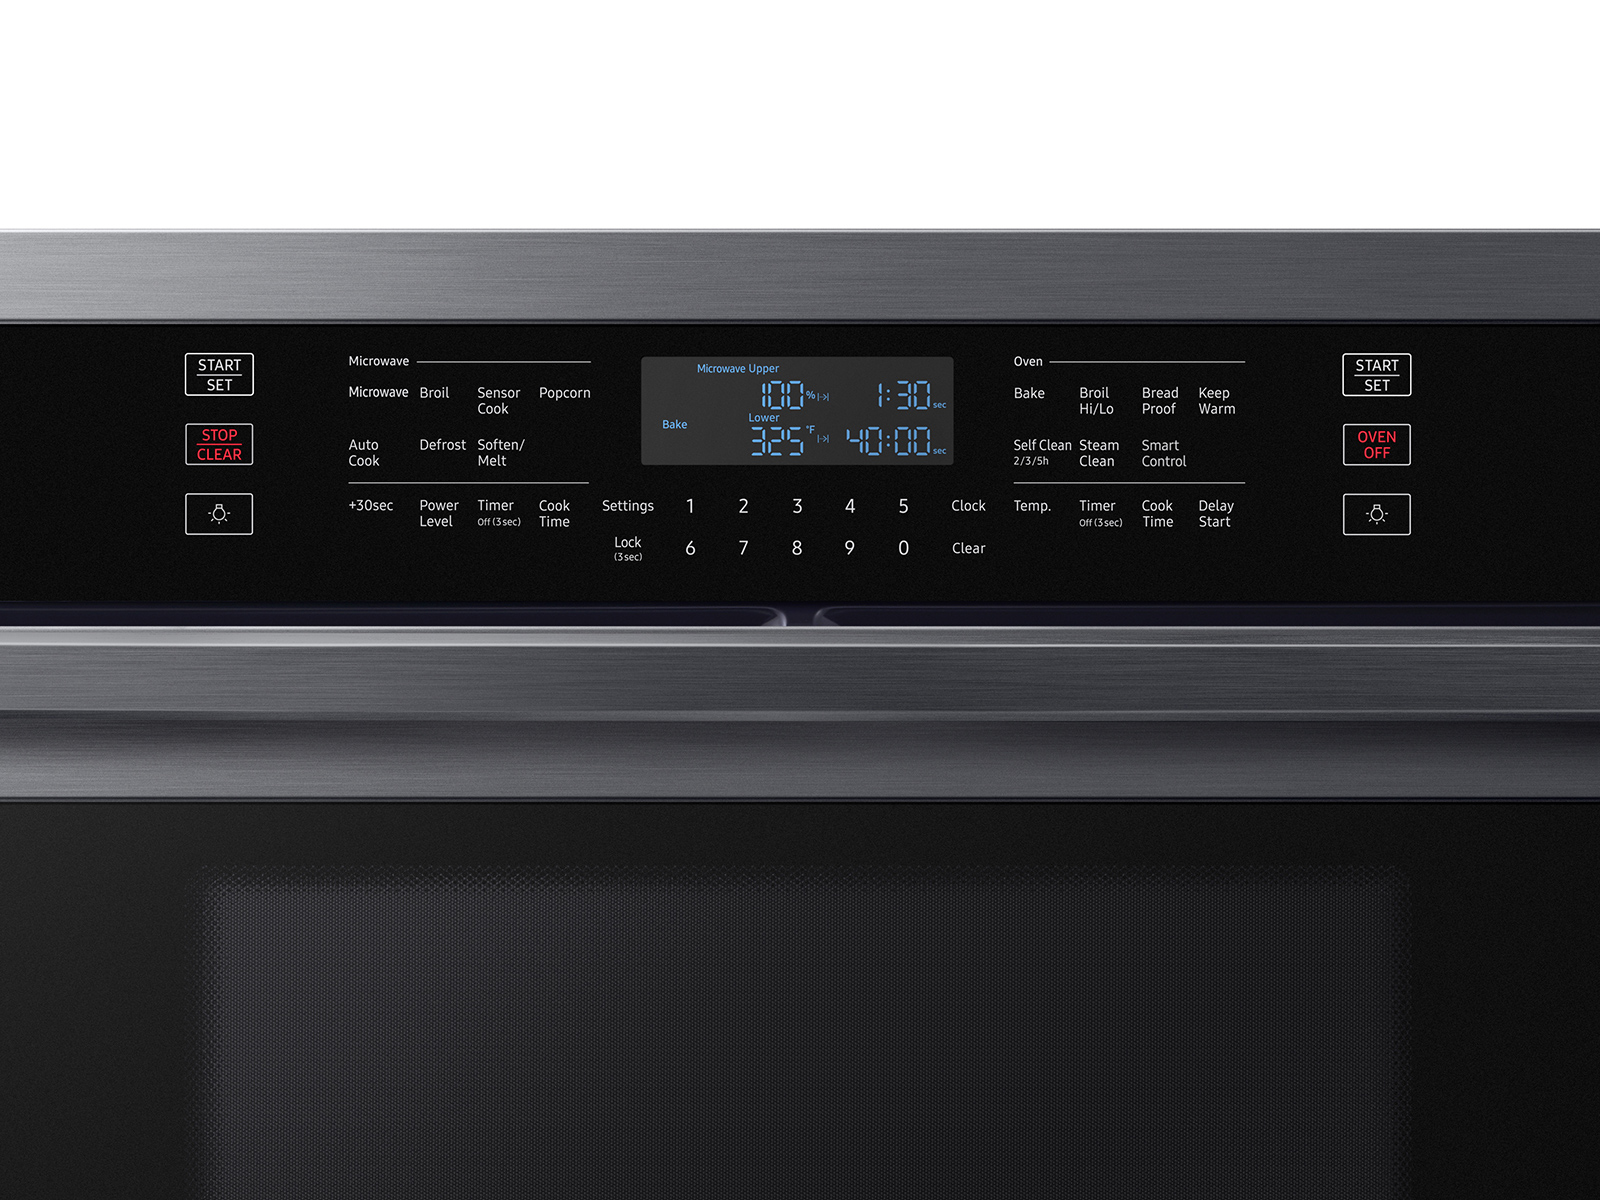 Thumbnail image of 30” Smart Electric Wall Oven with Microwave Combination in Black Stainless Steel